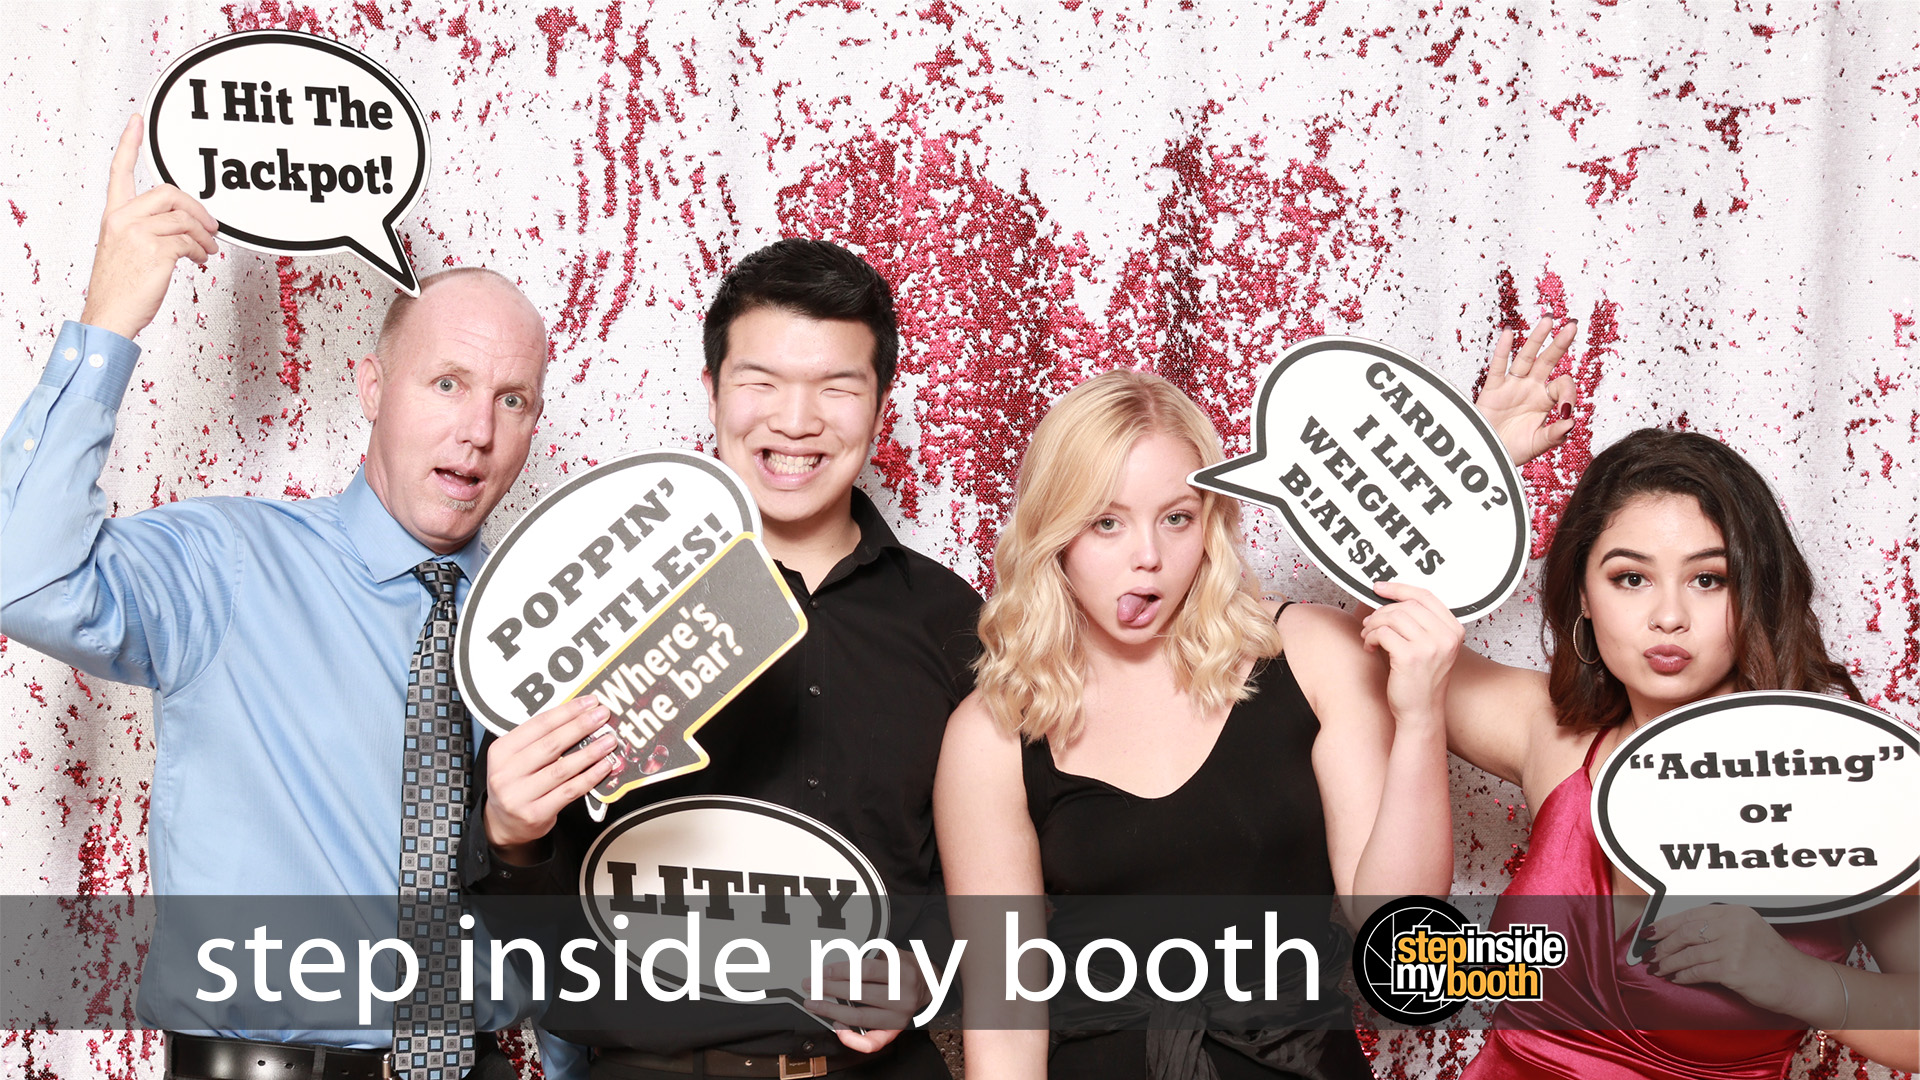 Step Inside My Booth Studio Quality Photo Booth for your event! Photo with guests from Allyson's Debutante Party on February, 19, 2019